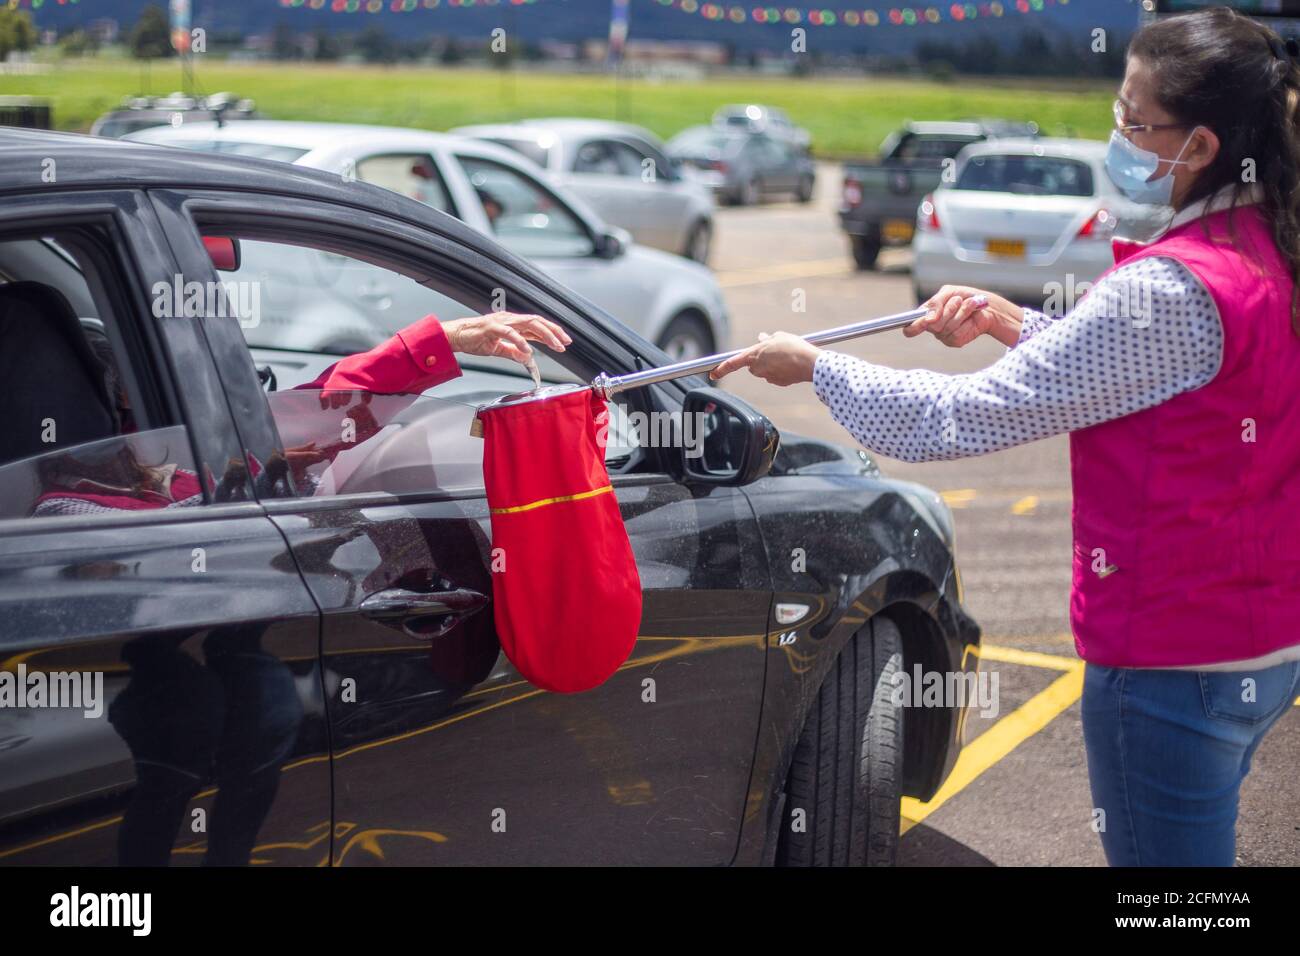 Bogota, Colombia. 6th Sep, 2020. One person passes by each car receiving donations in the car at the Los Andes racecourse in the city of BogotÃ¡.Due to the pandemic, the churches have not been able to reopen for people to go. In the coming weeks, the Colombian government will authorize the pilots for the opening. Credit: Daniel Garzon Herazo/ZUMA Wire/Alamy Live News Stock Photo